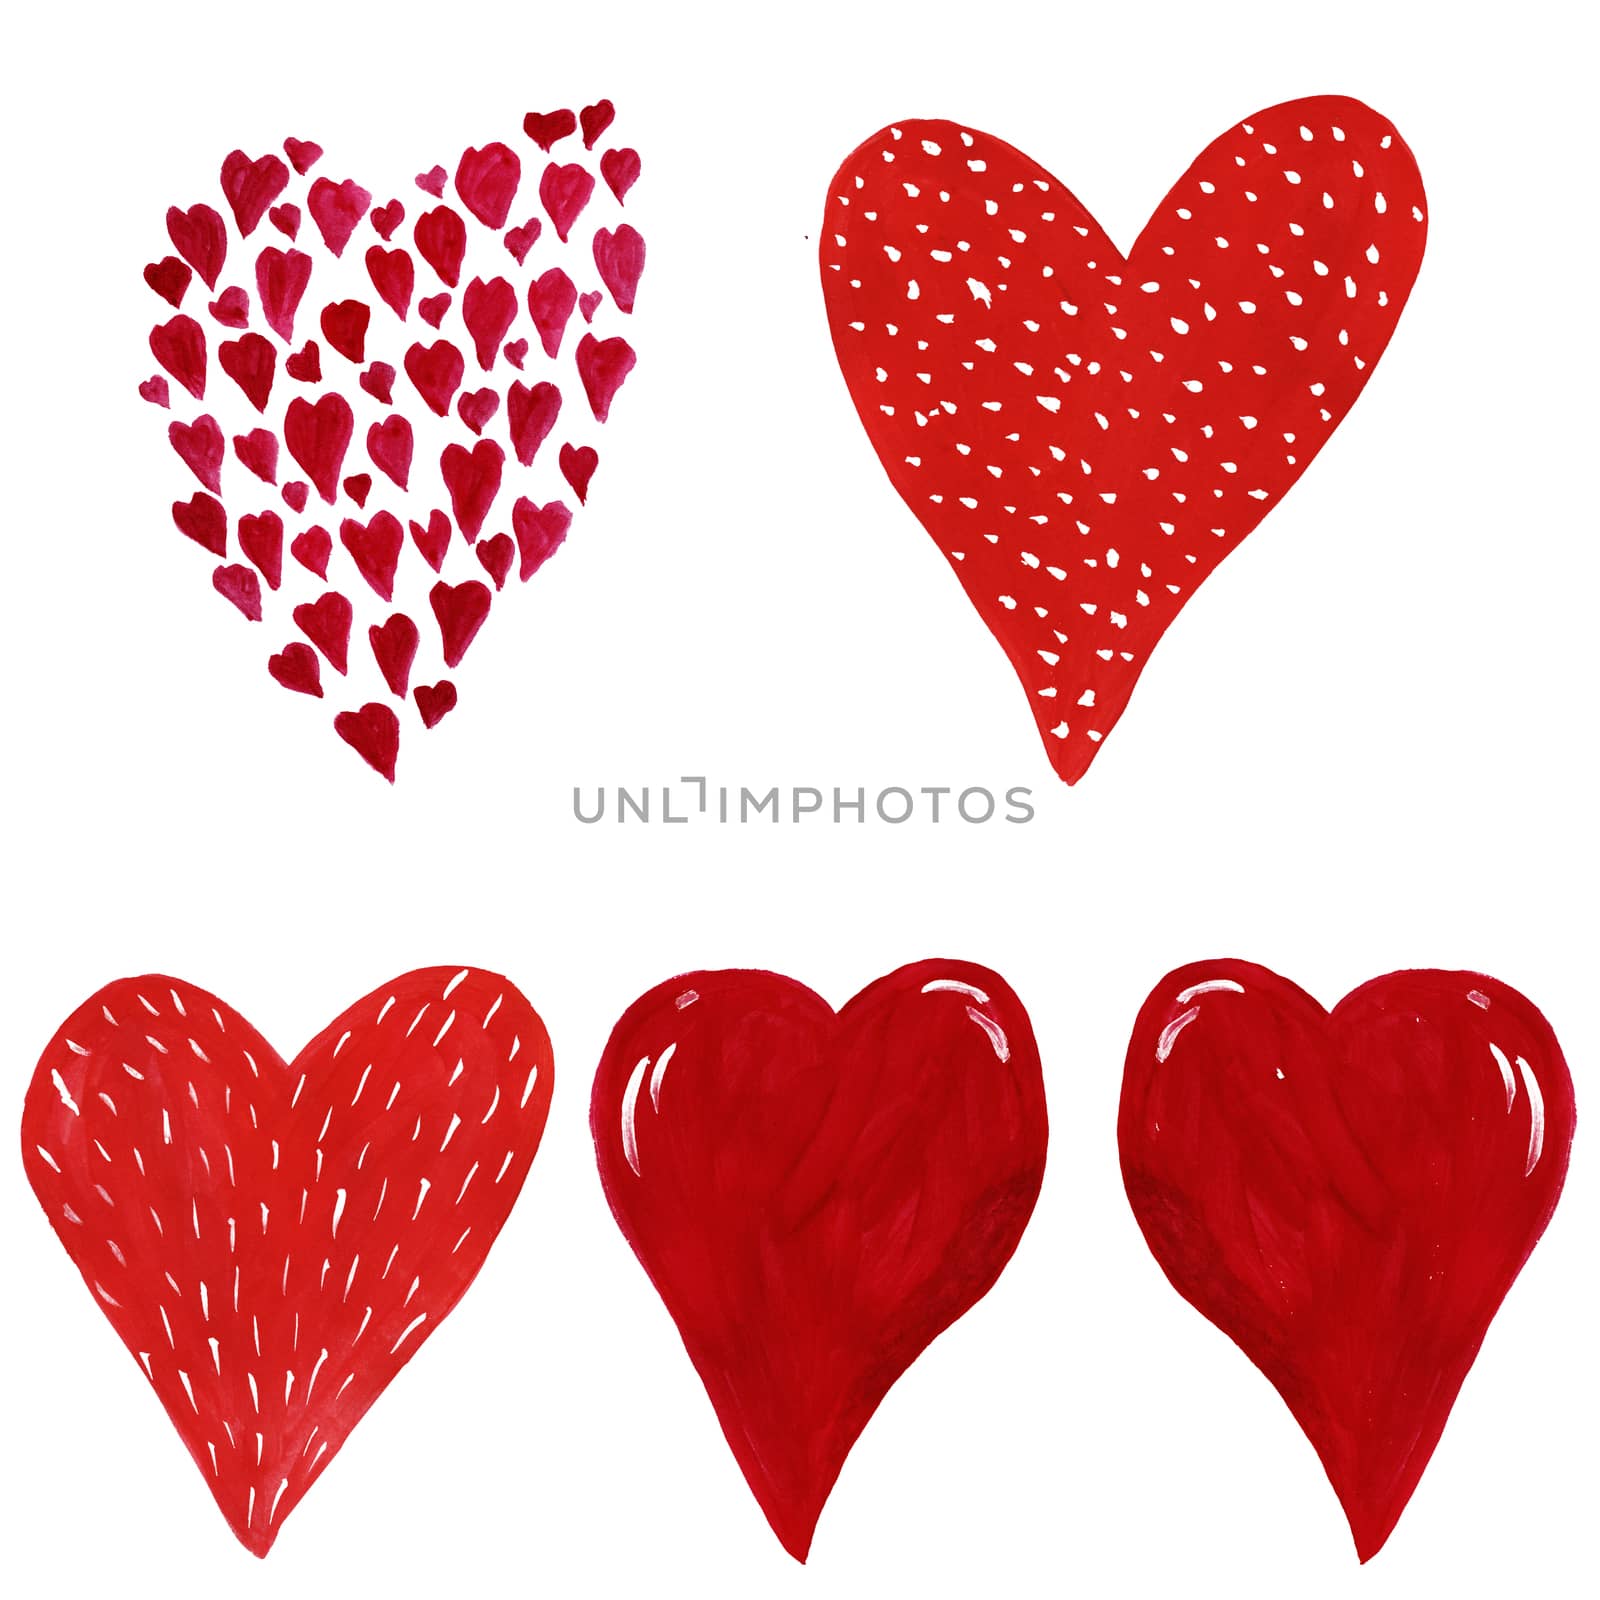 Hand drawn red hearts set isolated on white background. Romantic decor design for print, poster, t shirt, card.